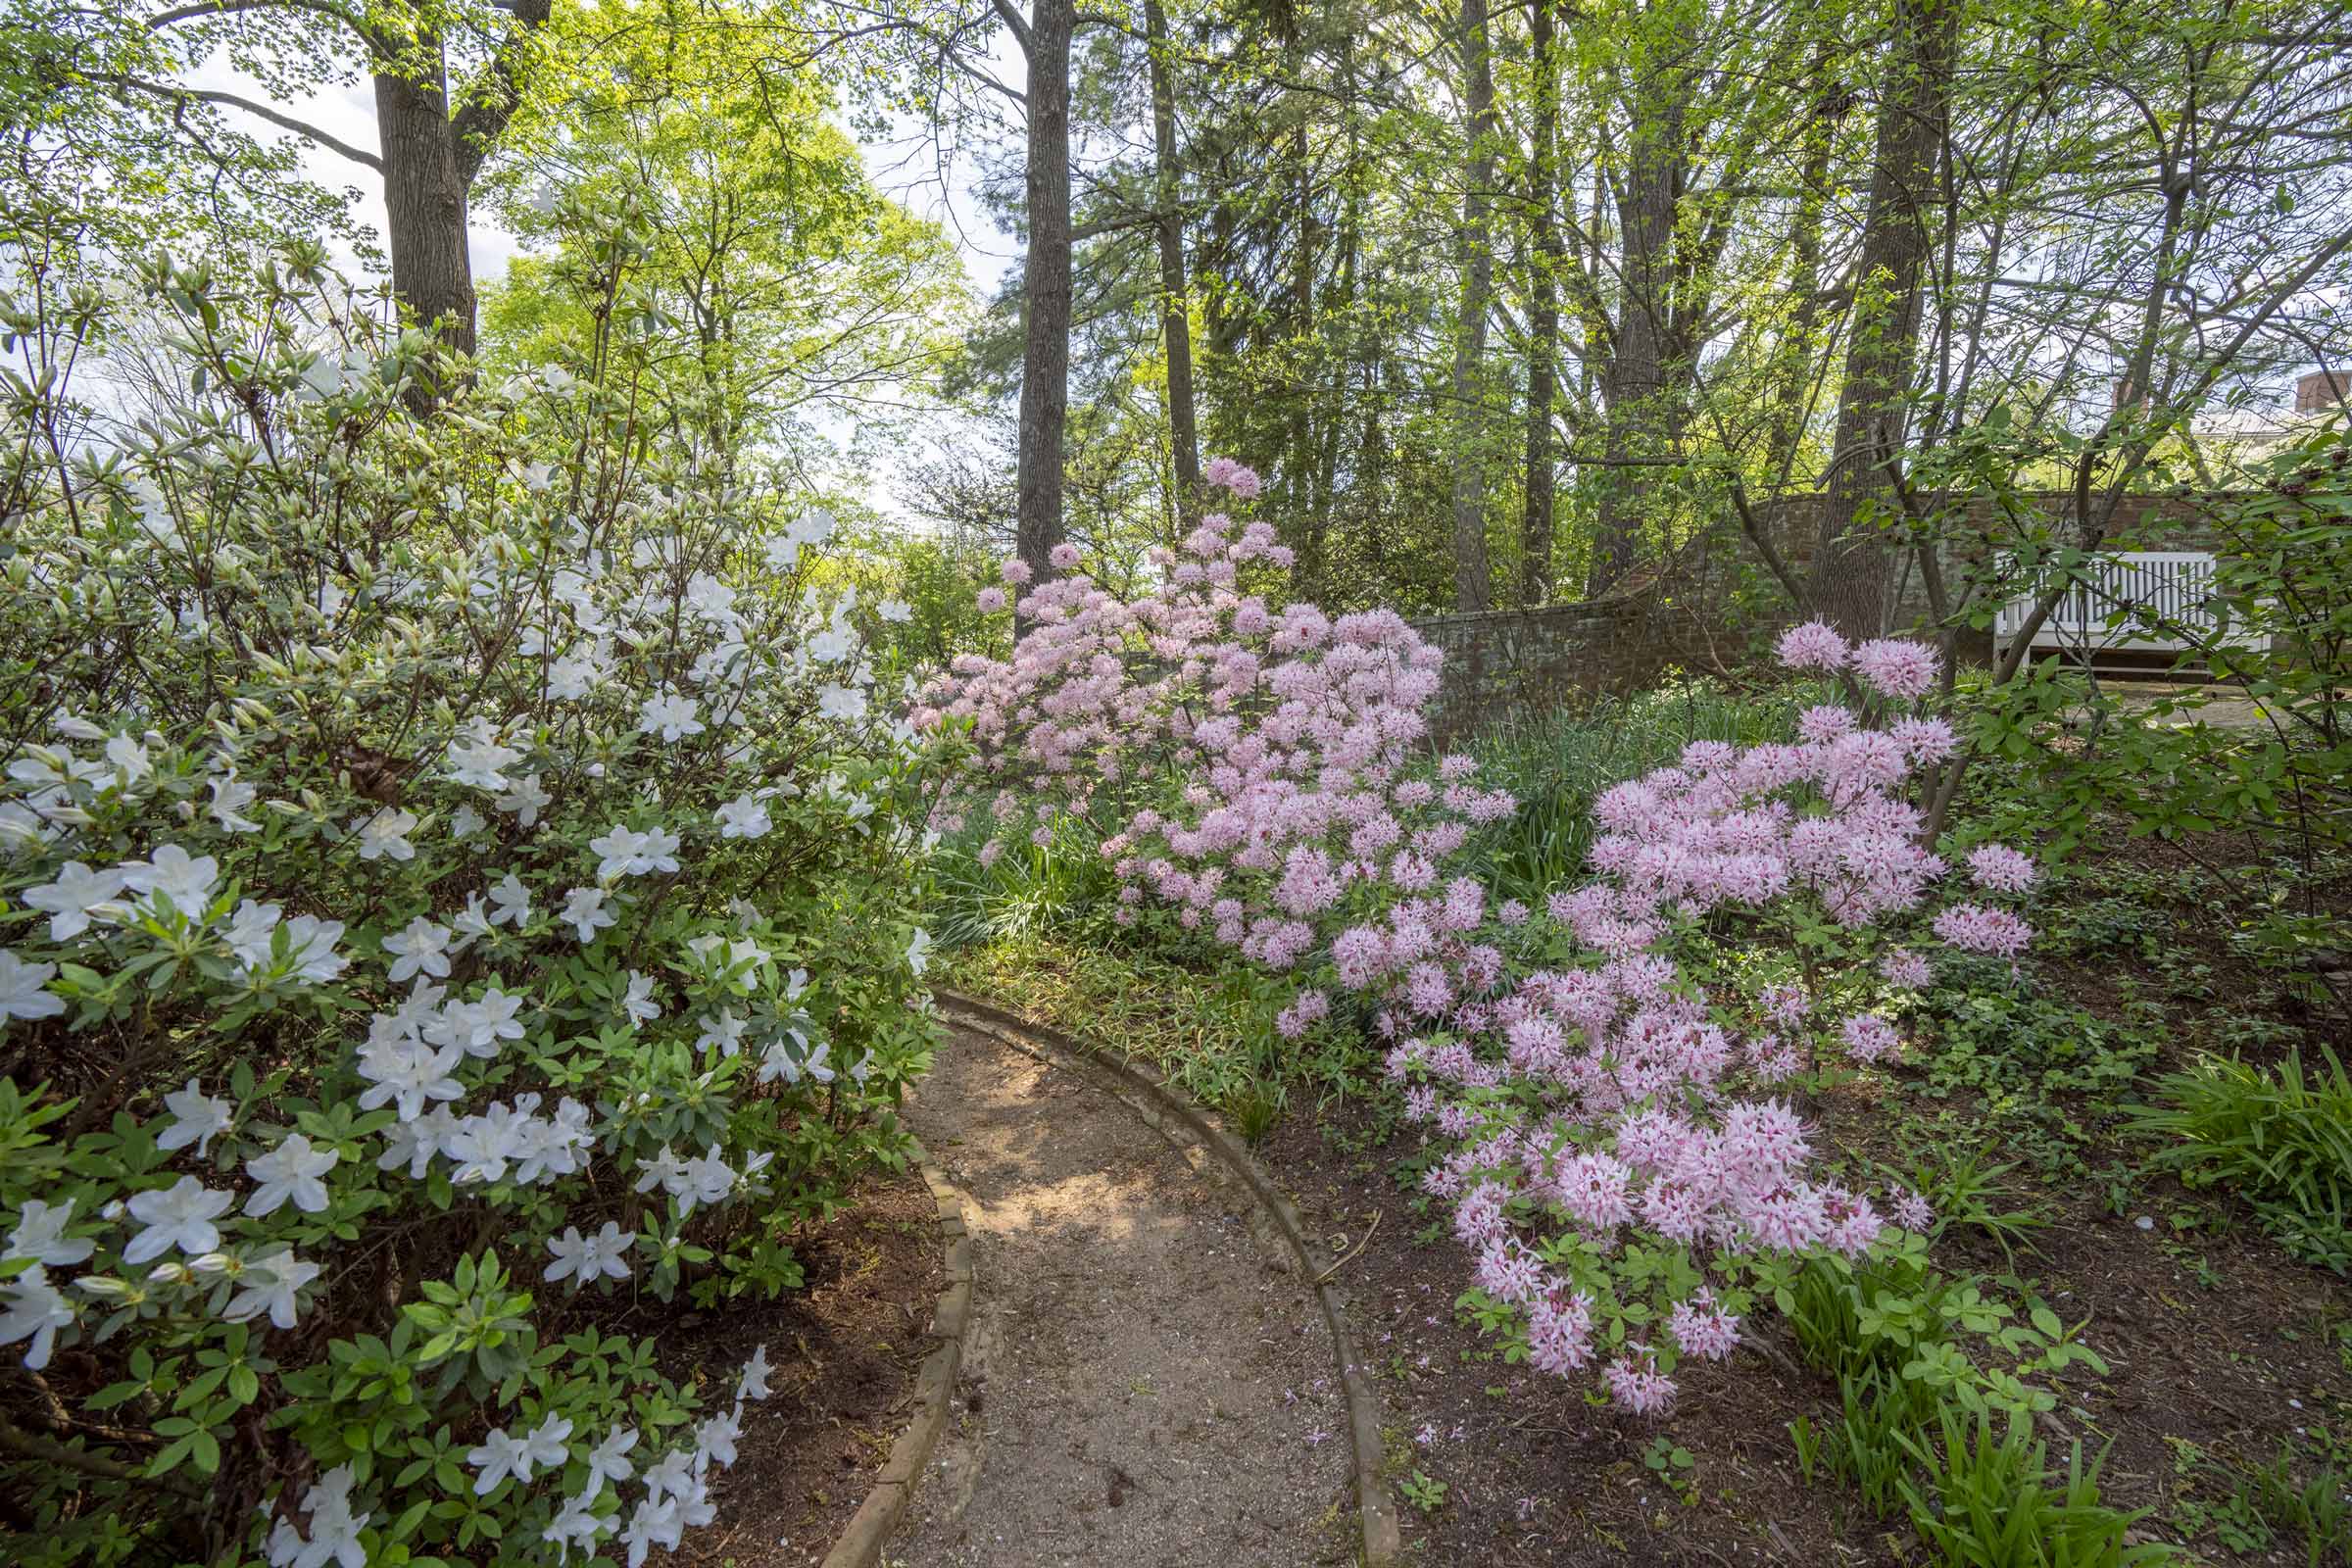 A nice shaded portion of the path with white flowers in bloom on the left and pink flowers in bloom on the right